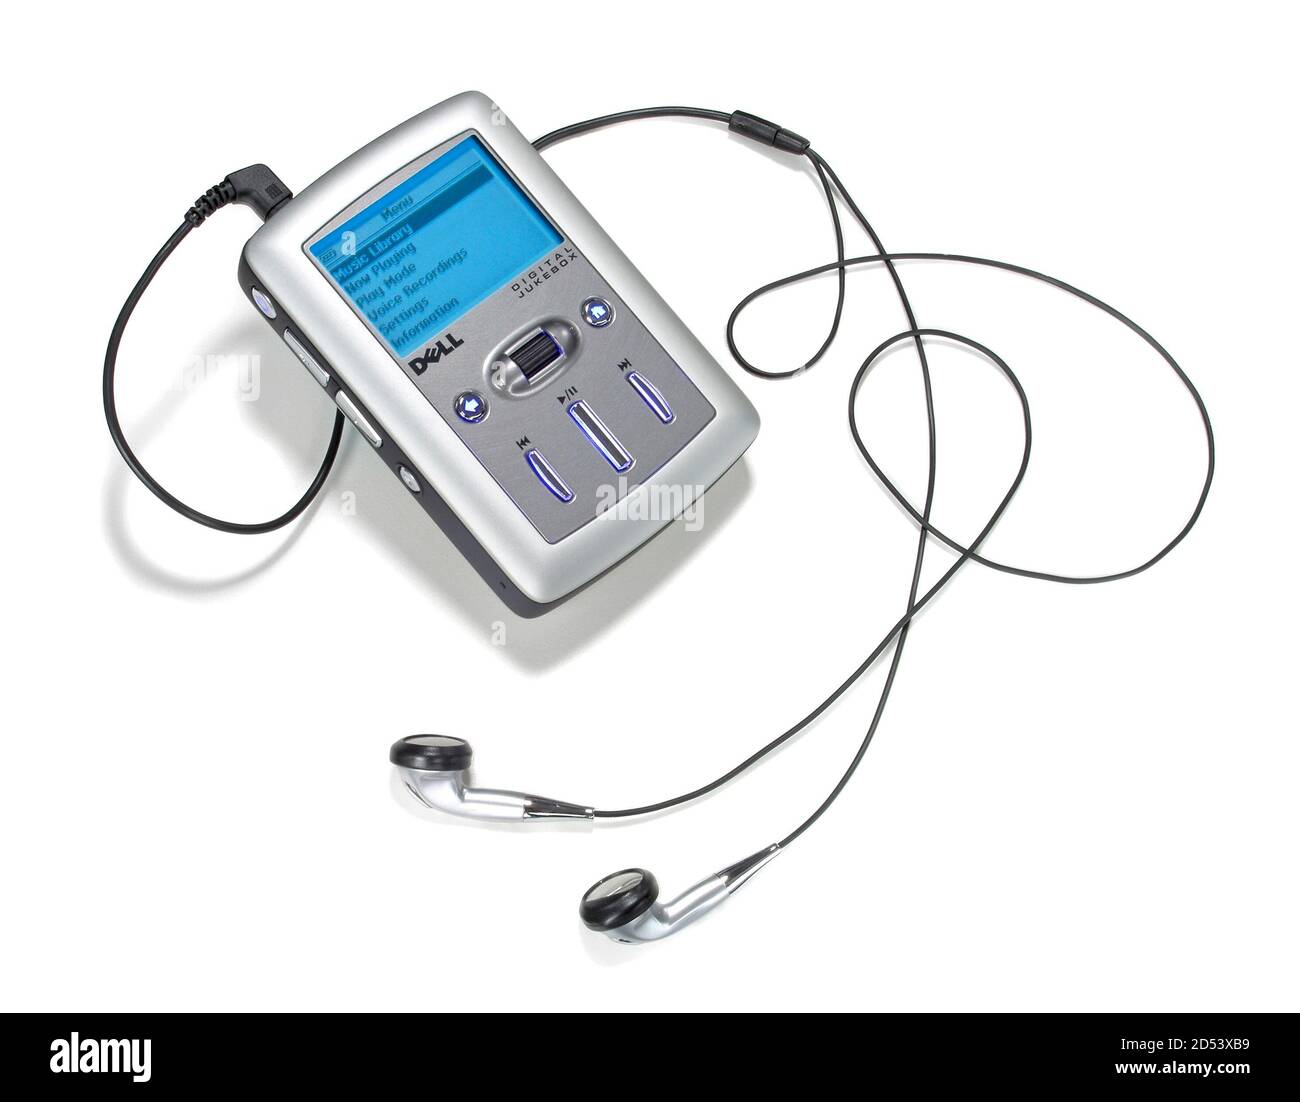 Dell digital jukebox mp3 player photographed on a white background Stock  Photo - Alamy